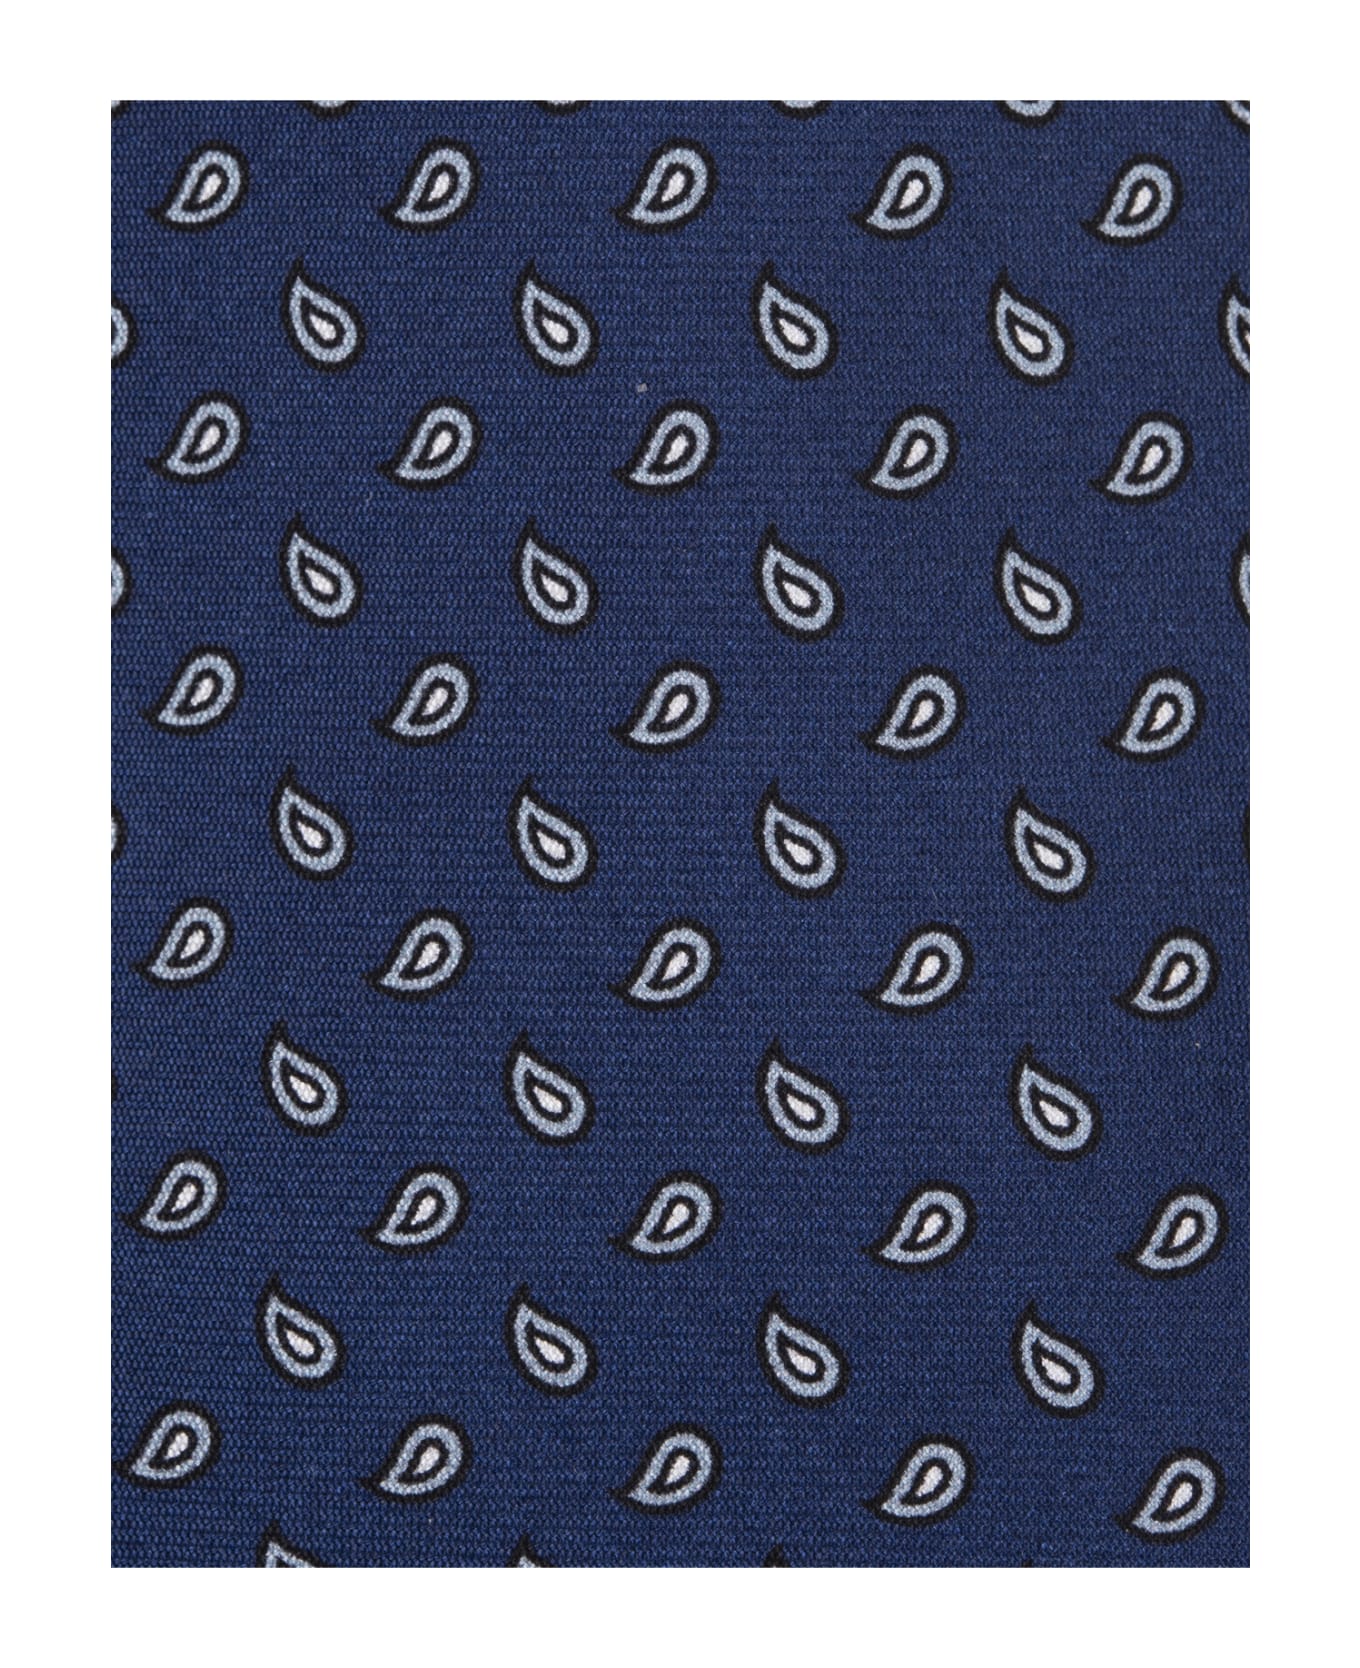 Kiton Blue Tie With Drops Pattern - Blue